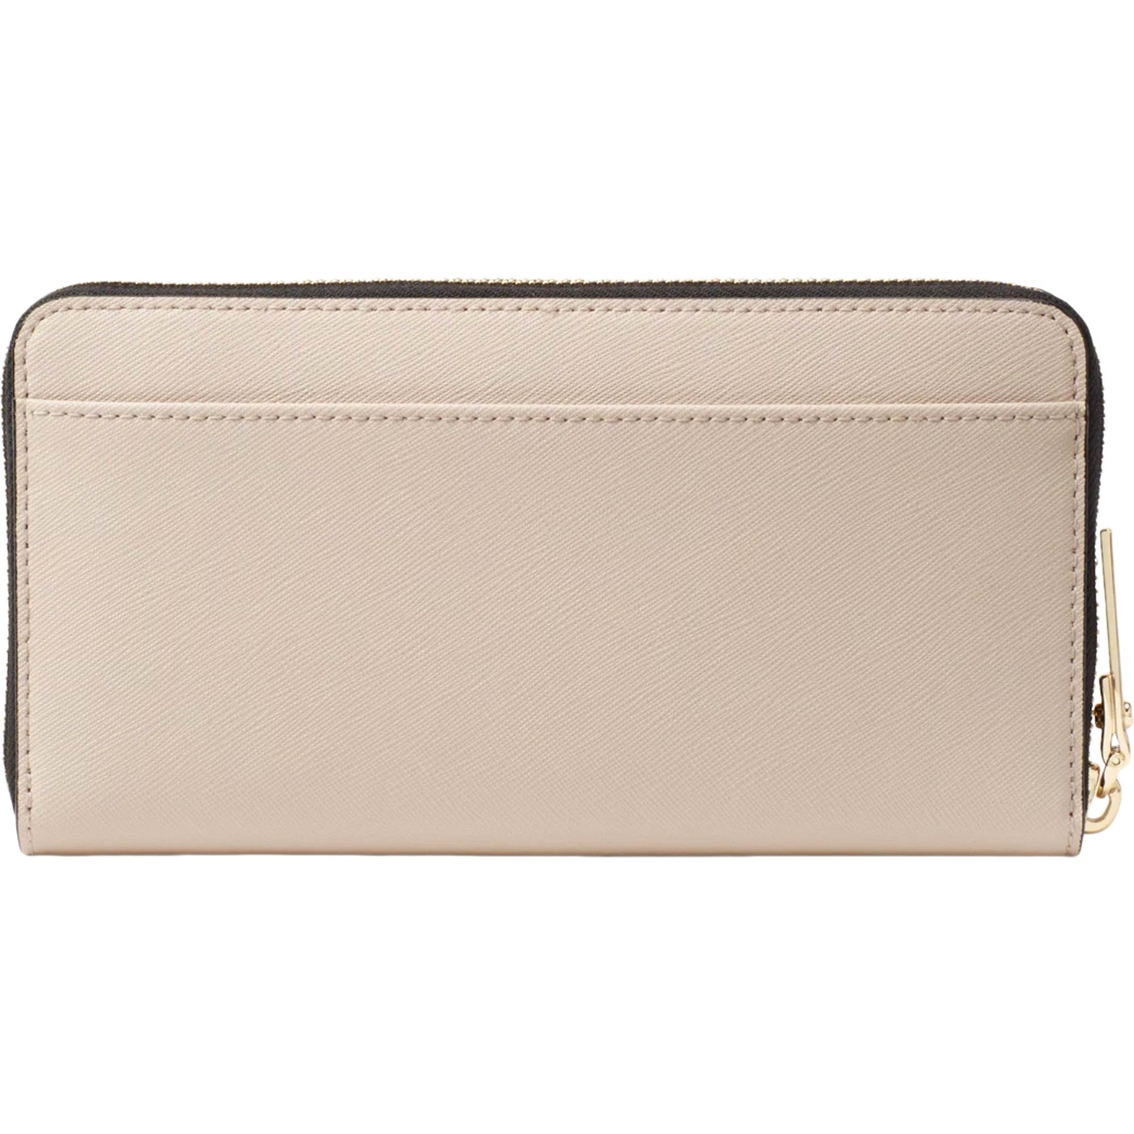 Kate Spade New York Cameron Street Lacey Wallet | Wallets | Clothing ...